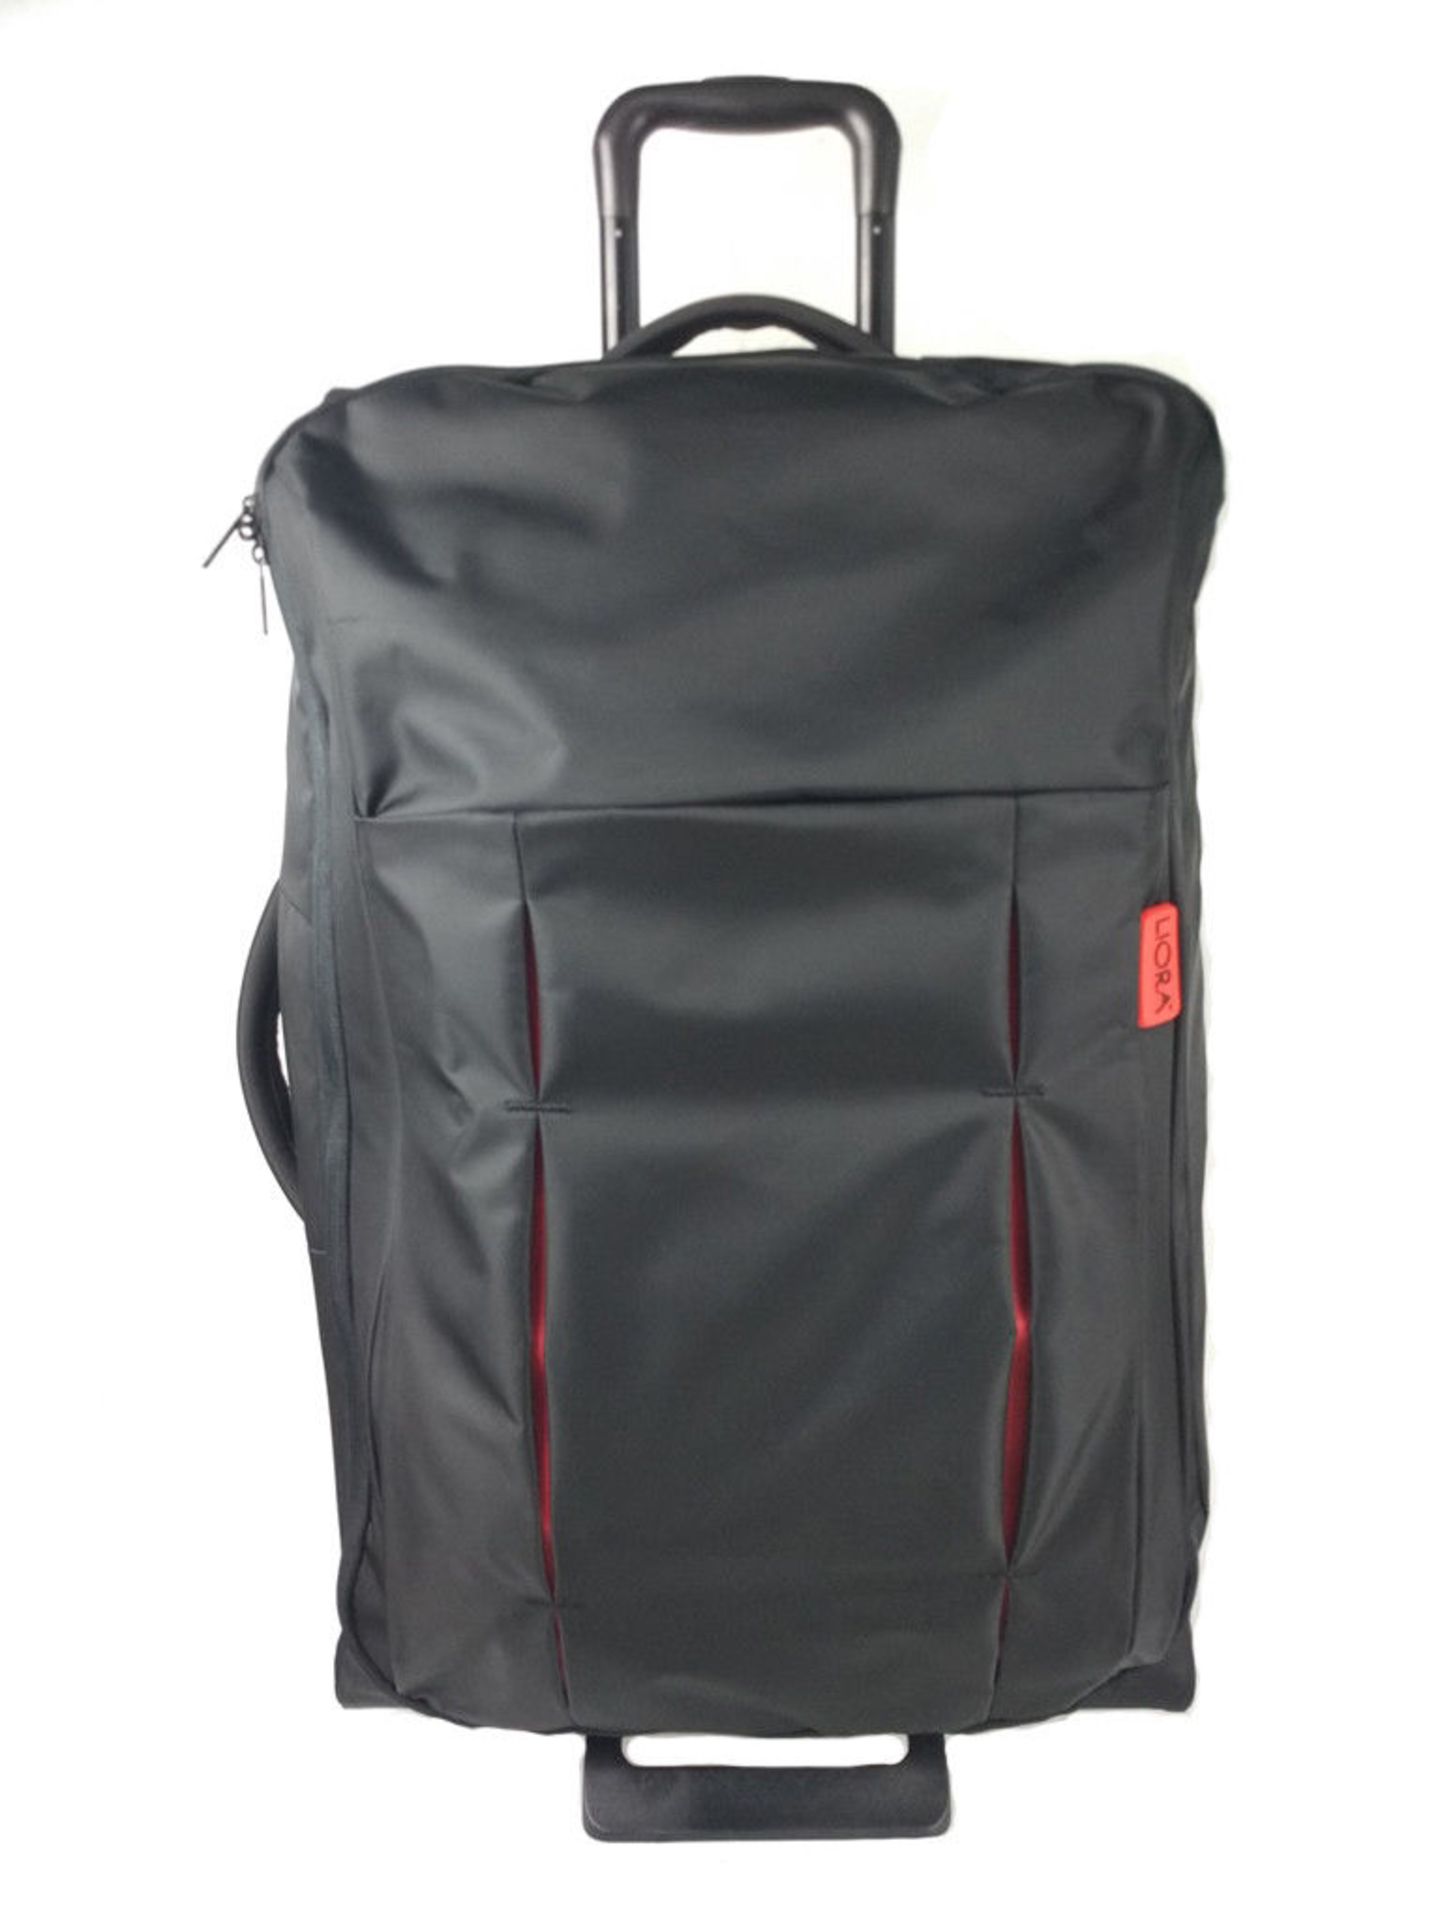 V Liora Luggage 26cm Collapsible Rollercase Suitcase (Available From 21st June)